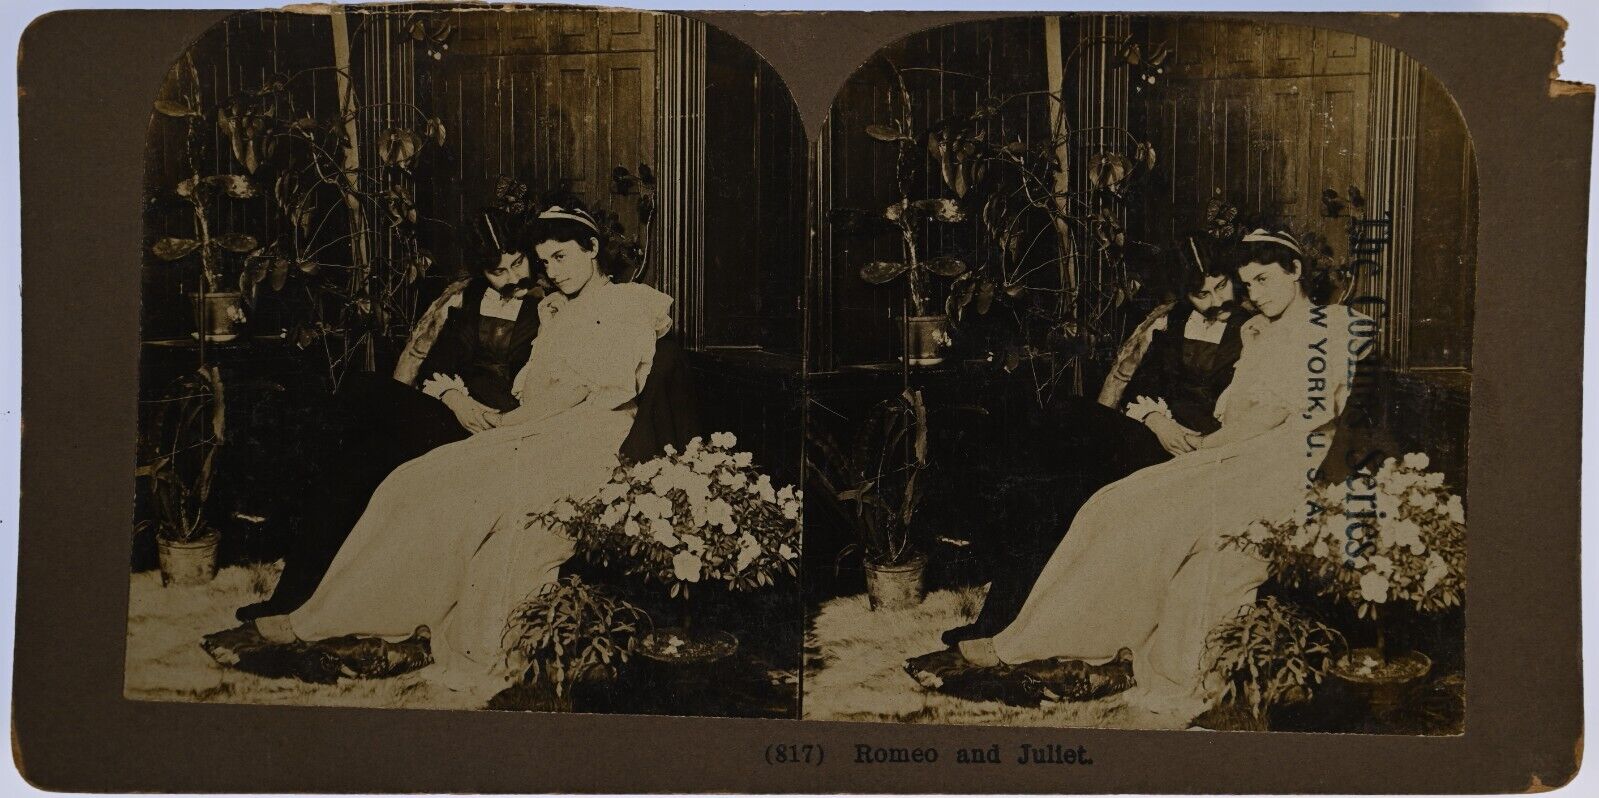 C. 1890s CABINET CARD ROMEO & JULIET CROSS-DRESSING LADY THEATER COSMOS SERIES